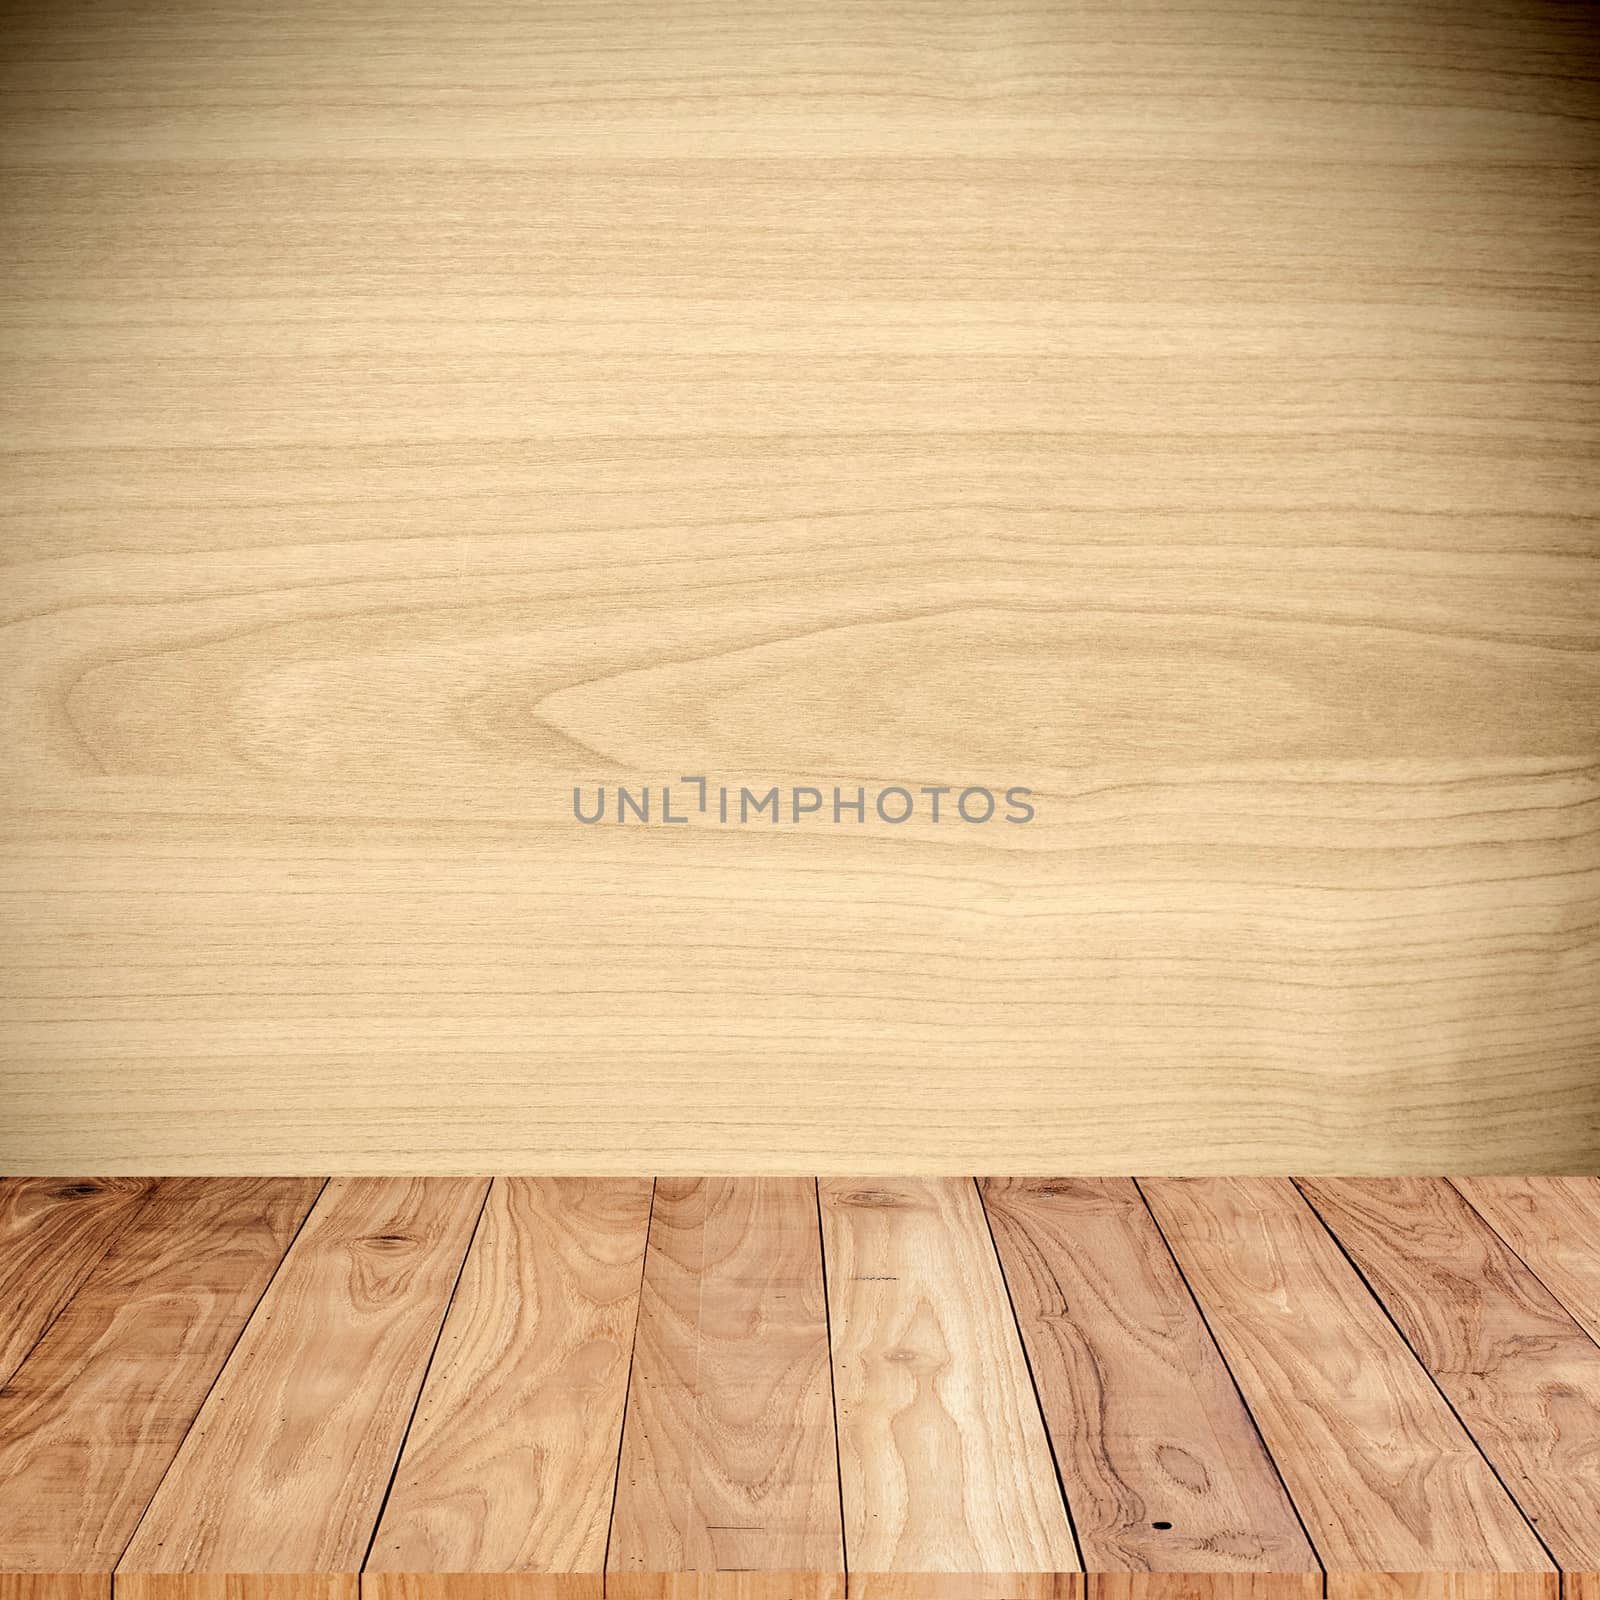 Wood texture with wood floor in the room by 2nix